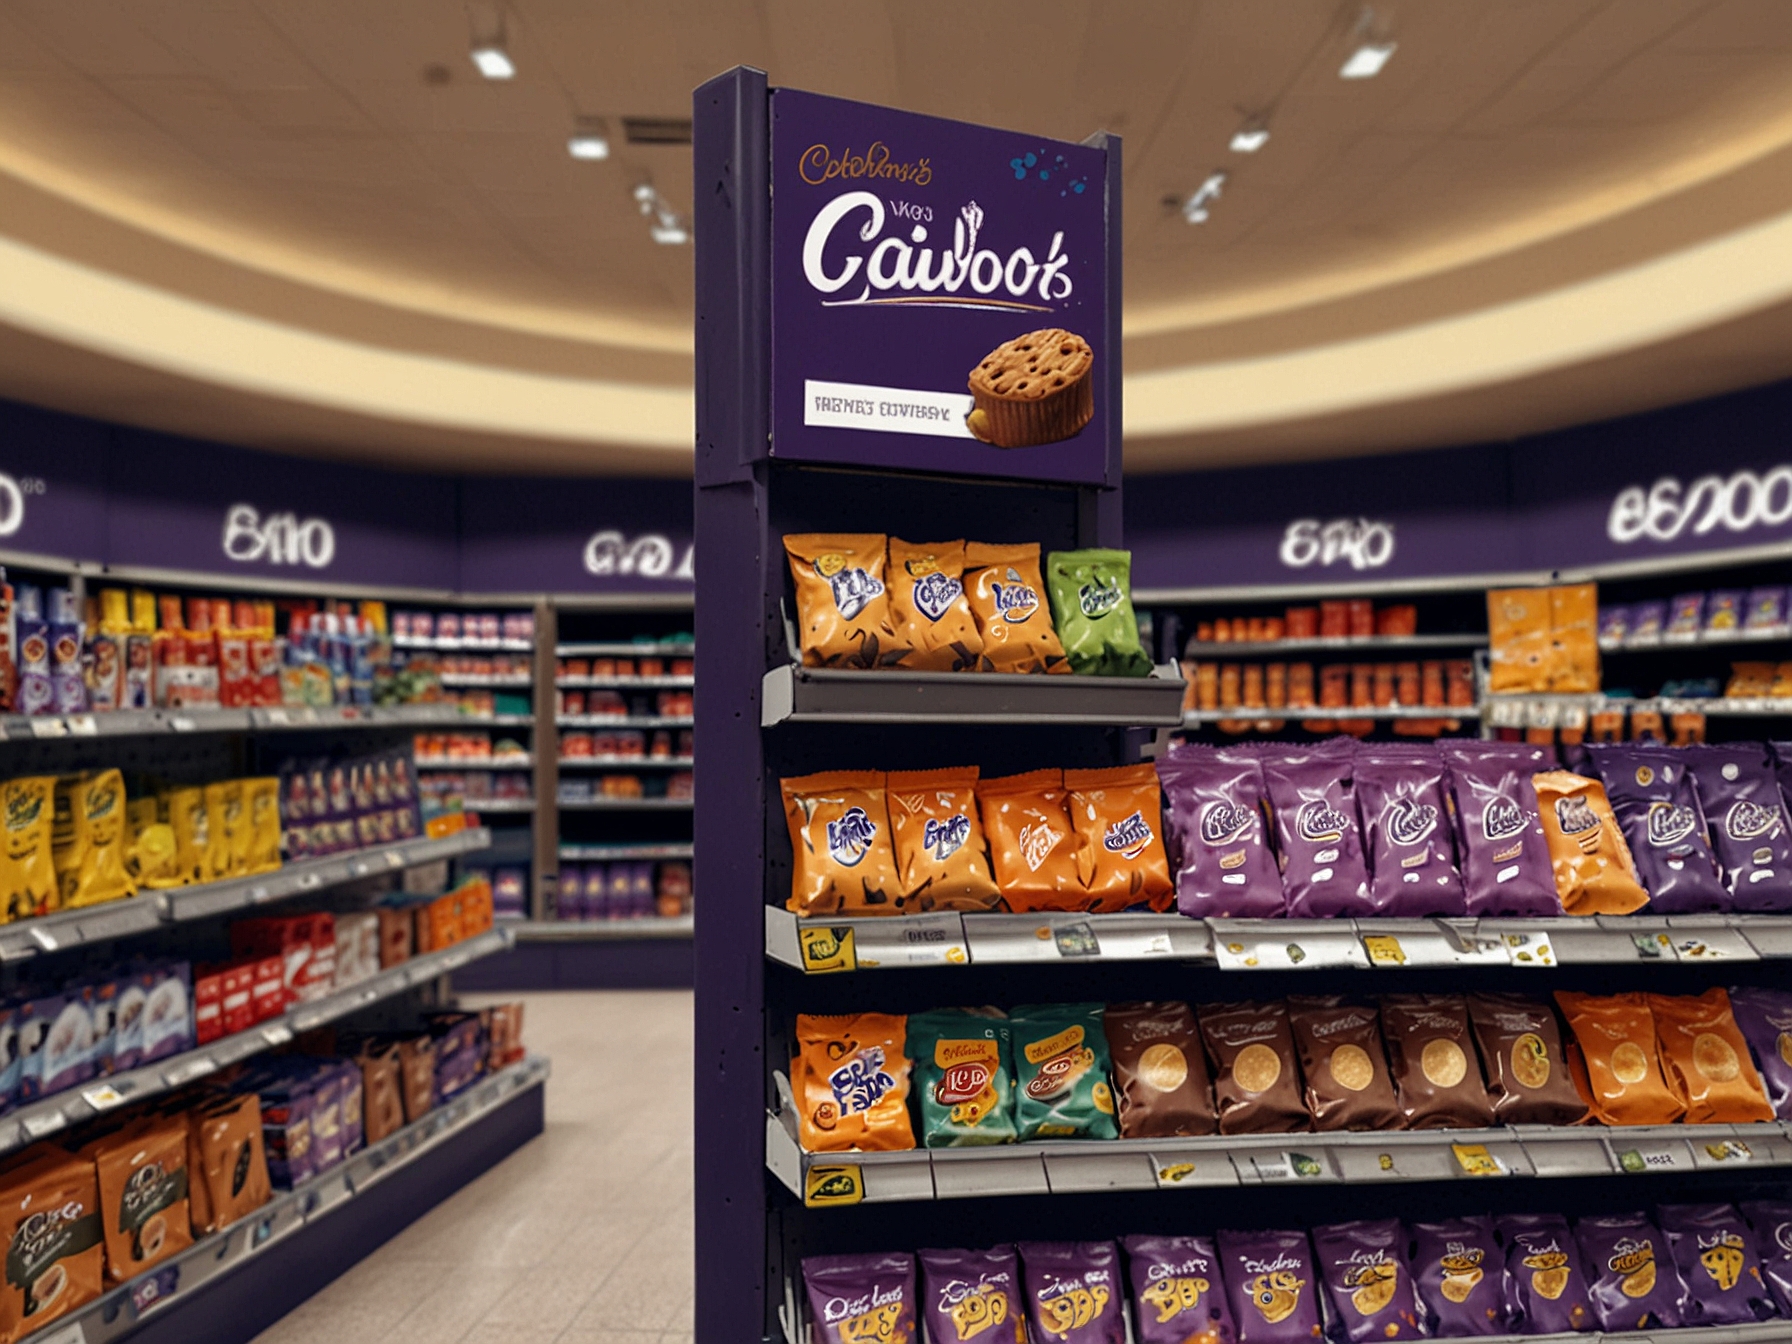 A display shelf in a major supermarket filled with Cadbury Freddos, prominently featuring signs announcing the special limited-time 10p offer.